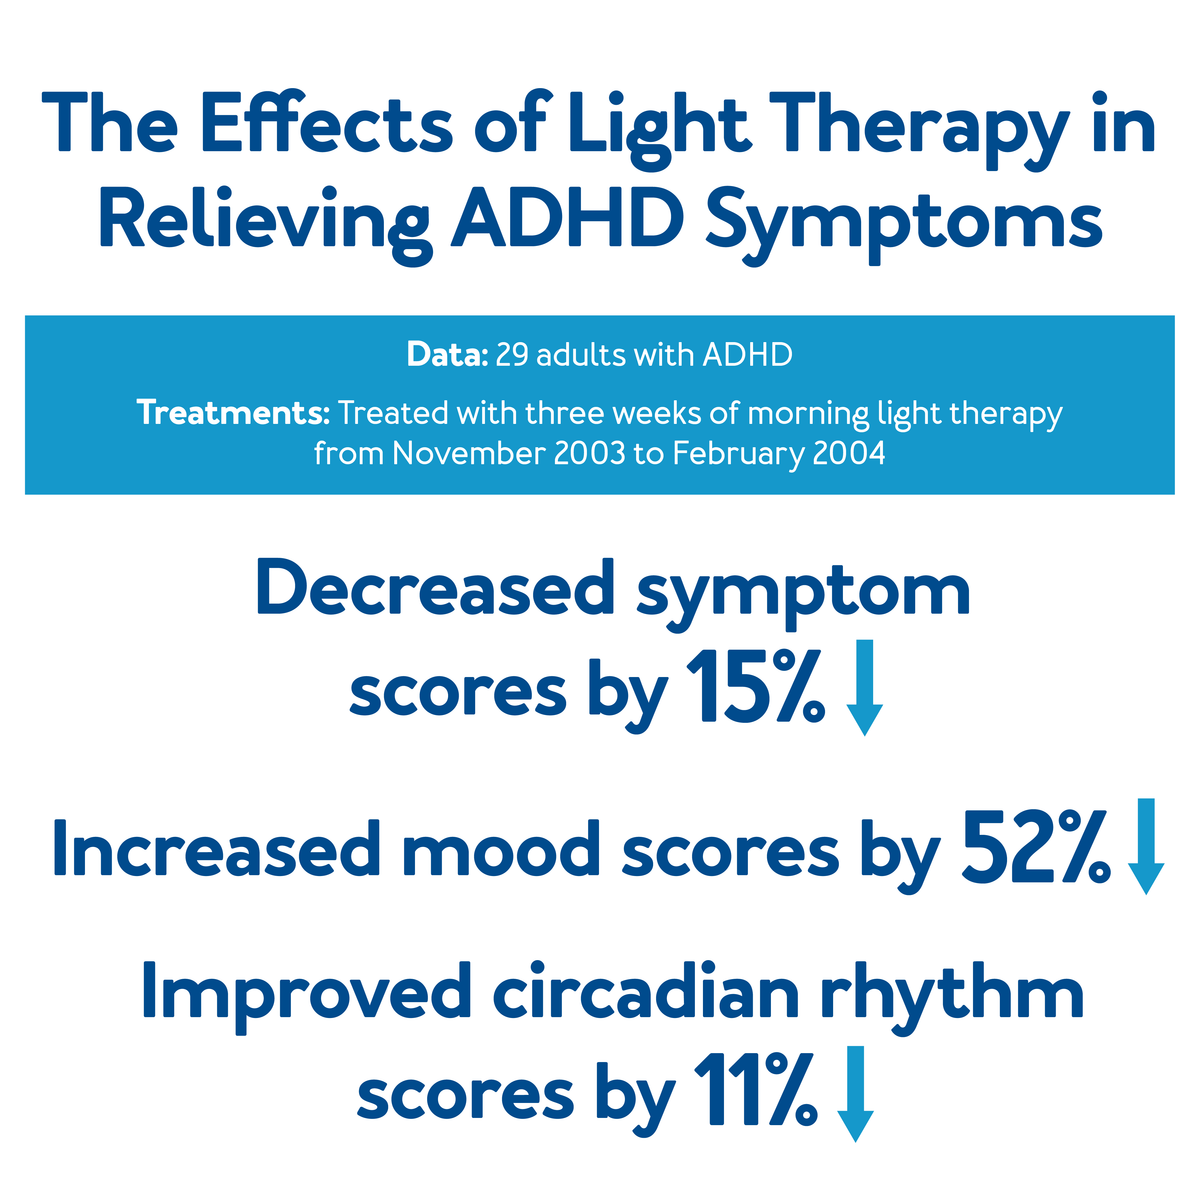 The Effects of Light Therapy in Relieving ADHD Symptoms, further details are provided below.